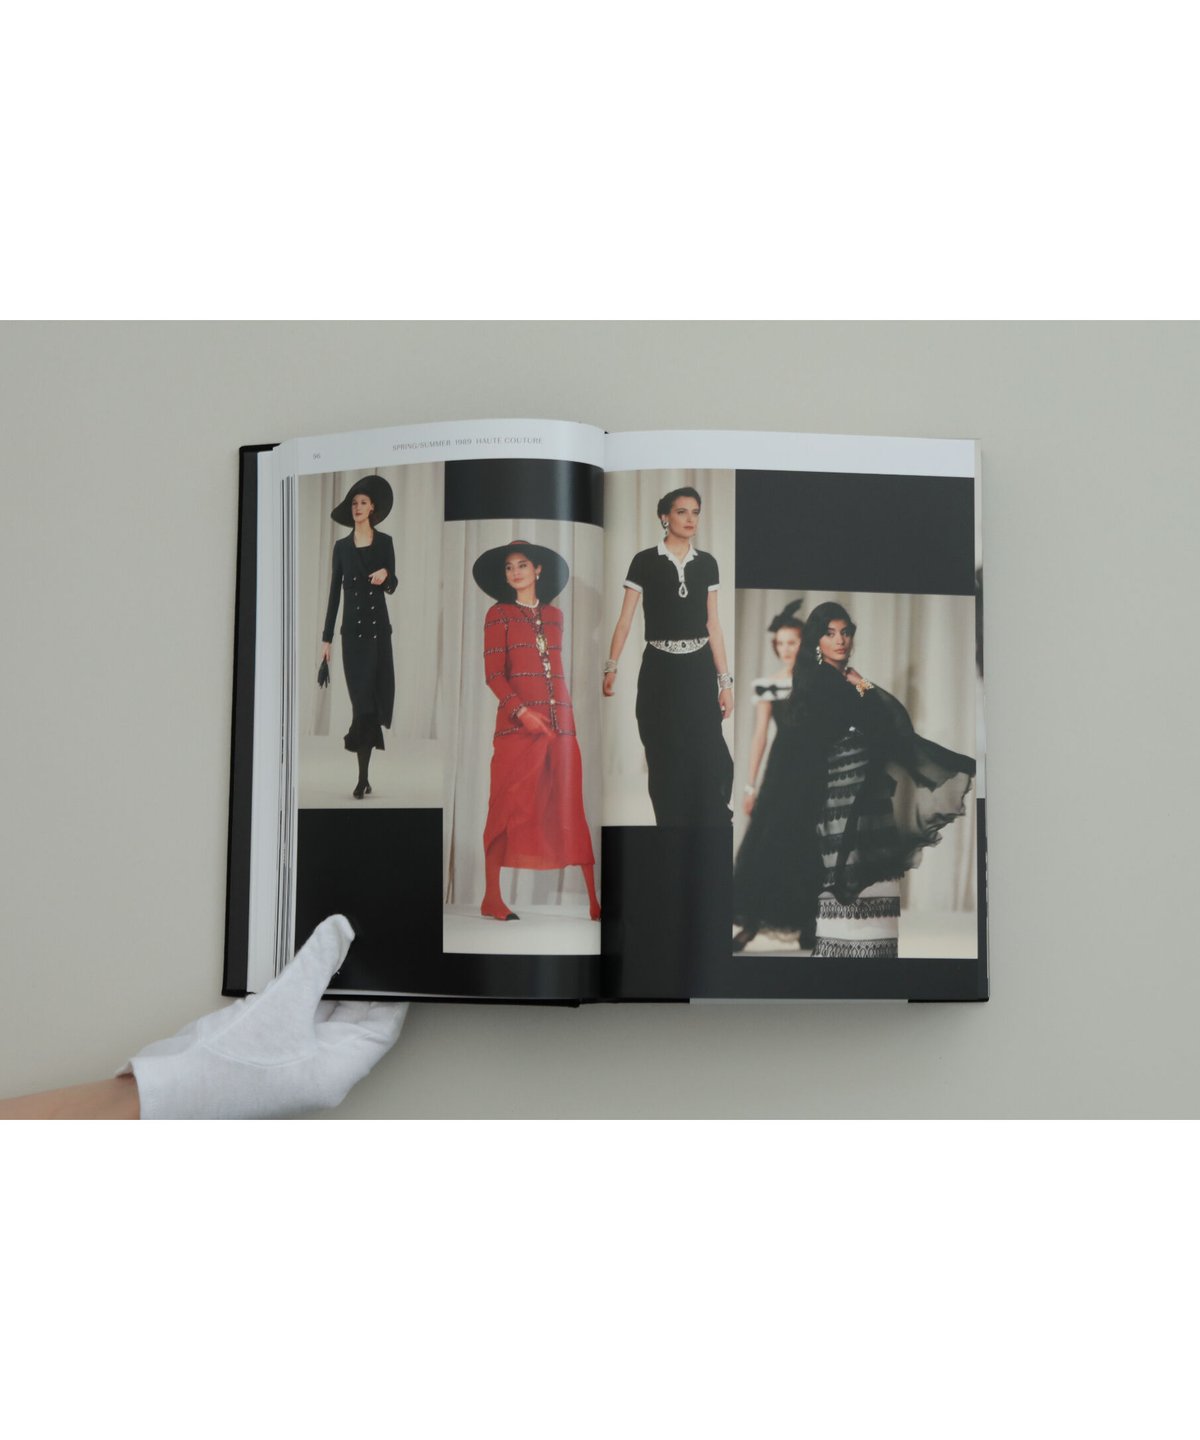 Chanel Catwalk: The Complete Collection Hardcover book by Patrick